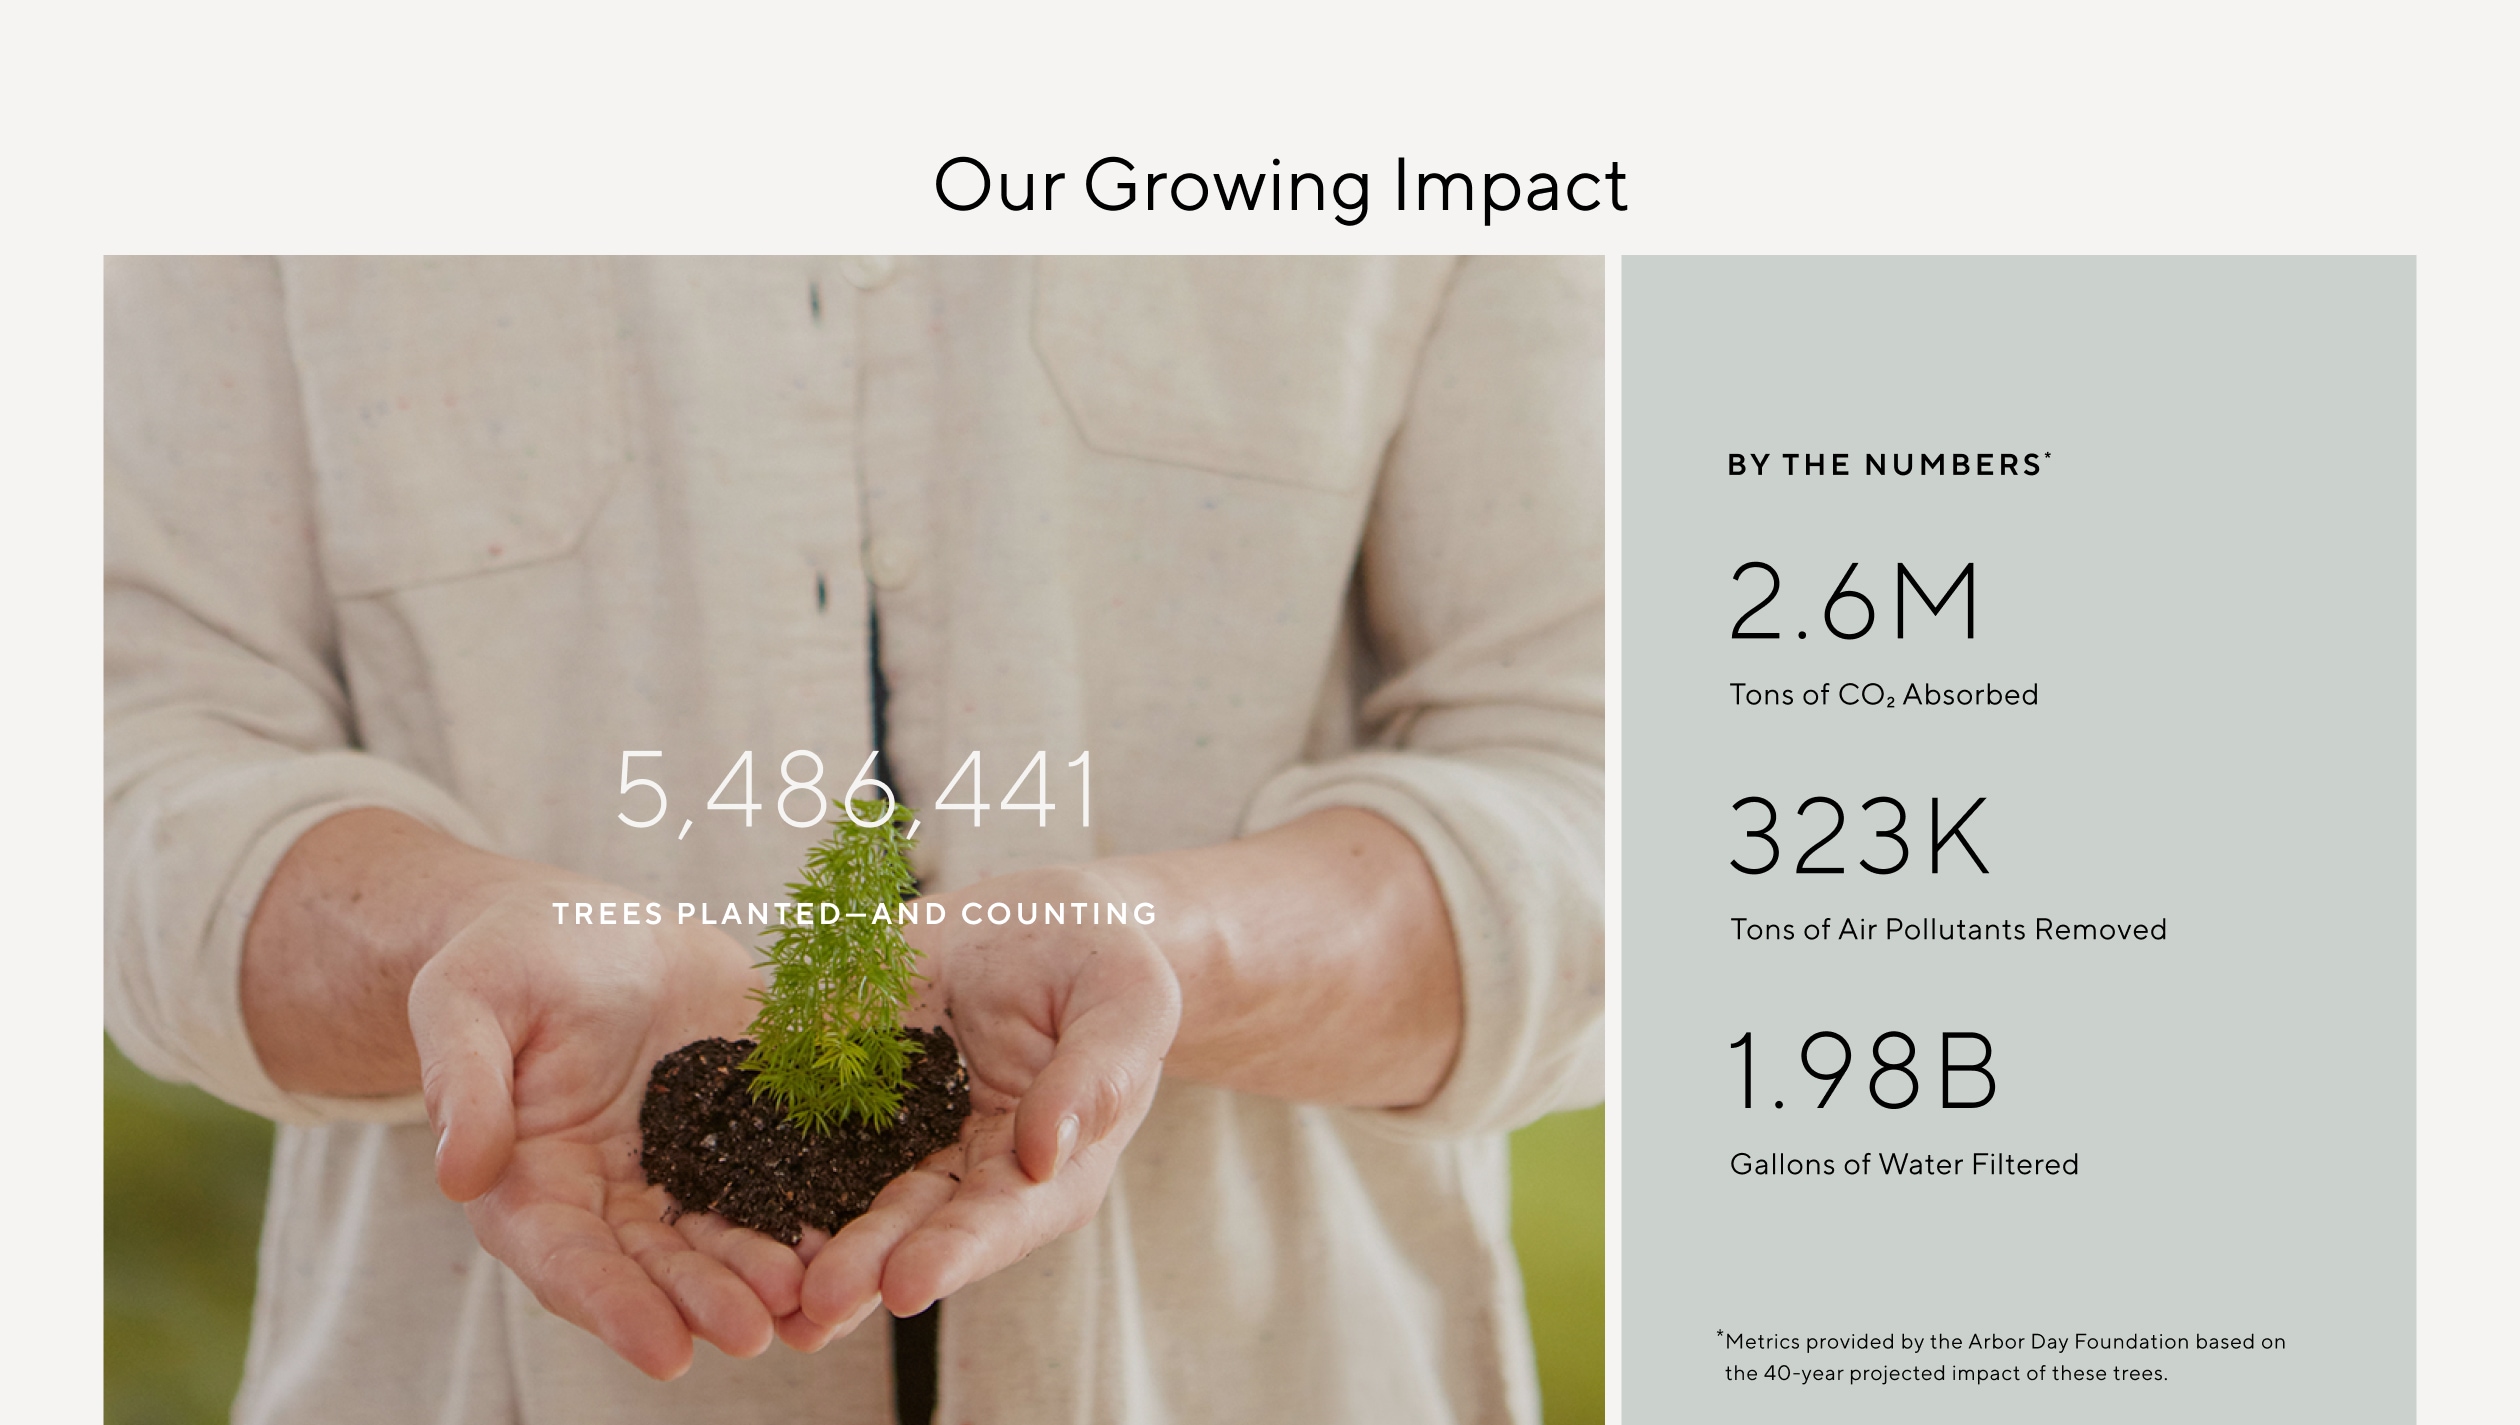 Our Growing Impact. 5,486,441 Trees planted---and counting. By the numbers*: 2.6M Tons of CO2 Absorbed, 323K Tons of Air Pollutants Removed, 1.98B Gallons of Water Filtered. *Metrics provided by the Arbor Day Foundation based on the 40-year projected impact of these trees.